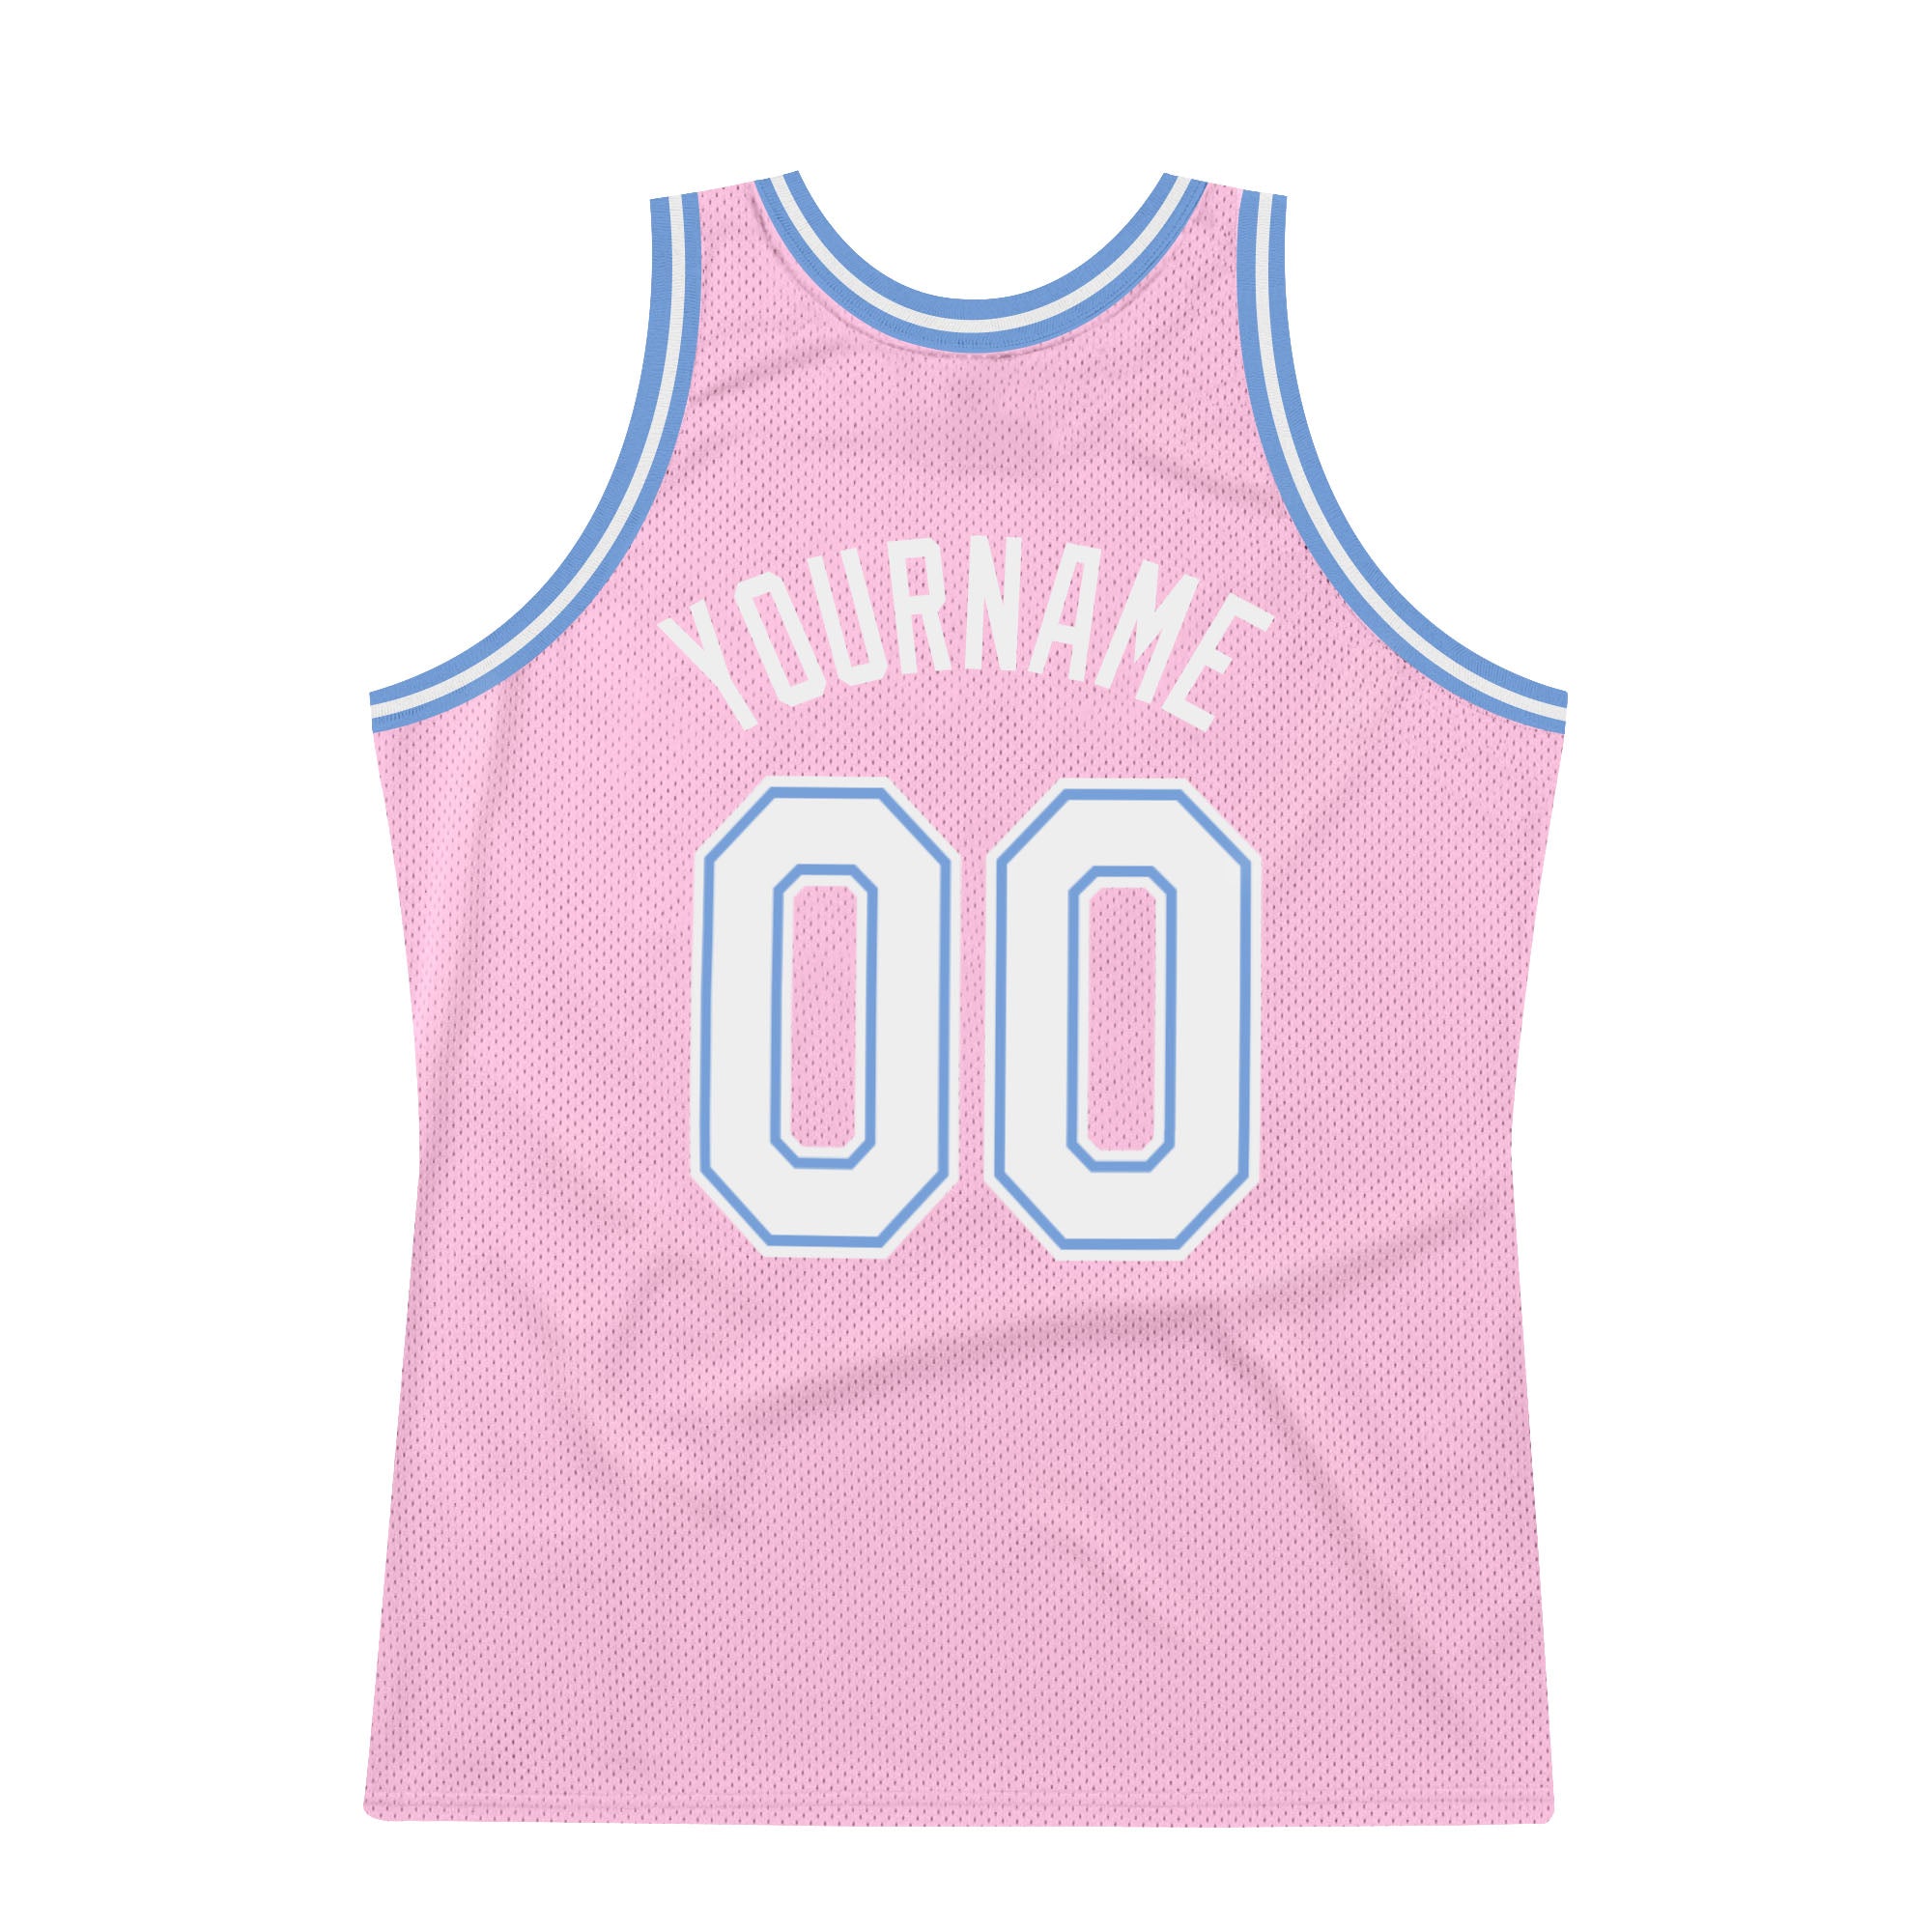 Cheap Custom Gray Teal-White Authentic Throwback Basketball Jersey Free  Shipping – CustomJerseysPro